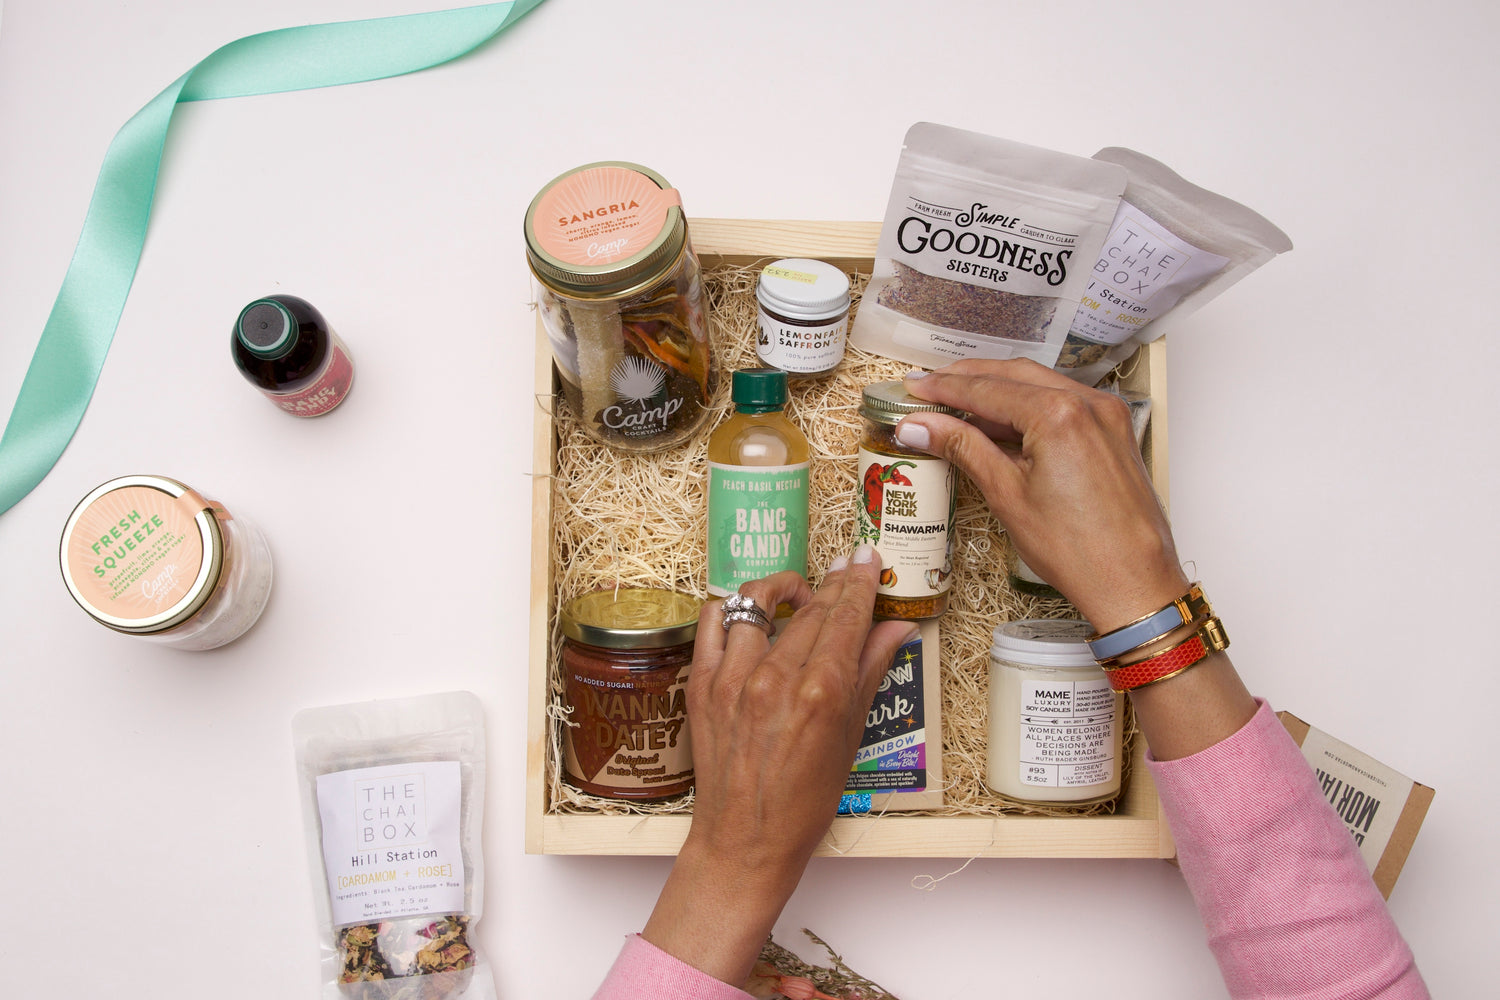 Curated gifts made by hand